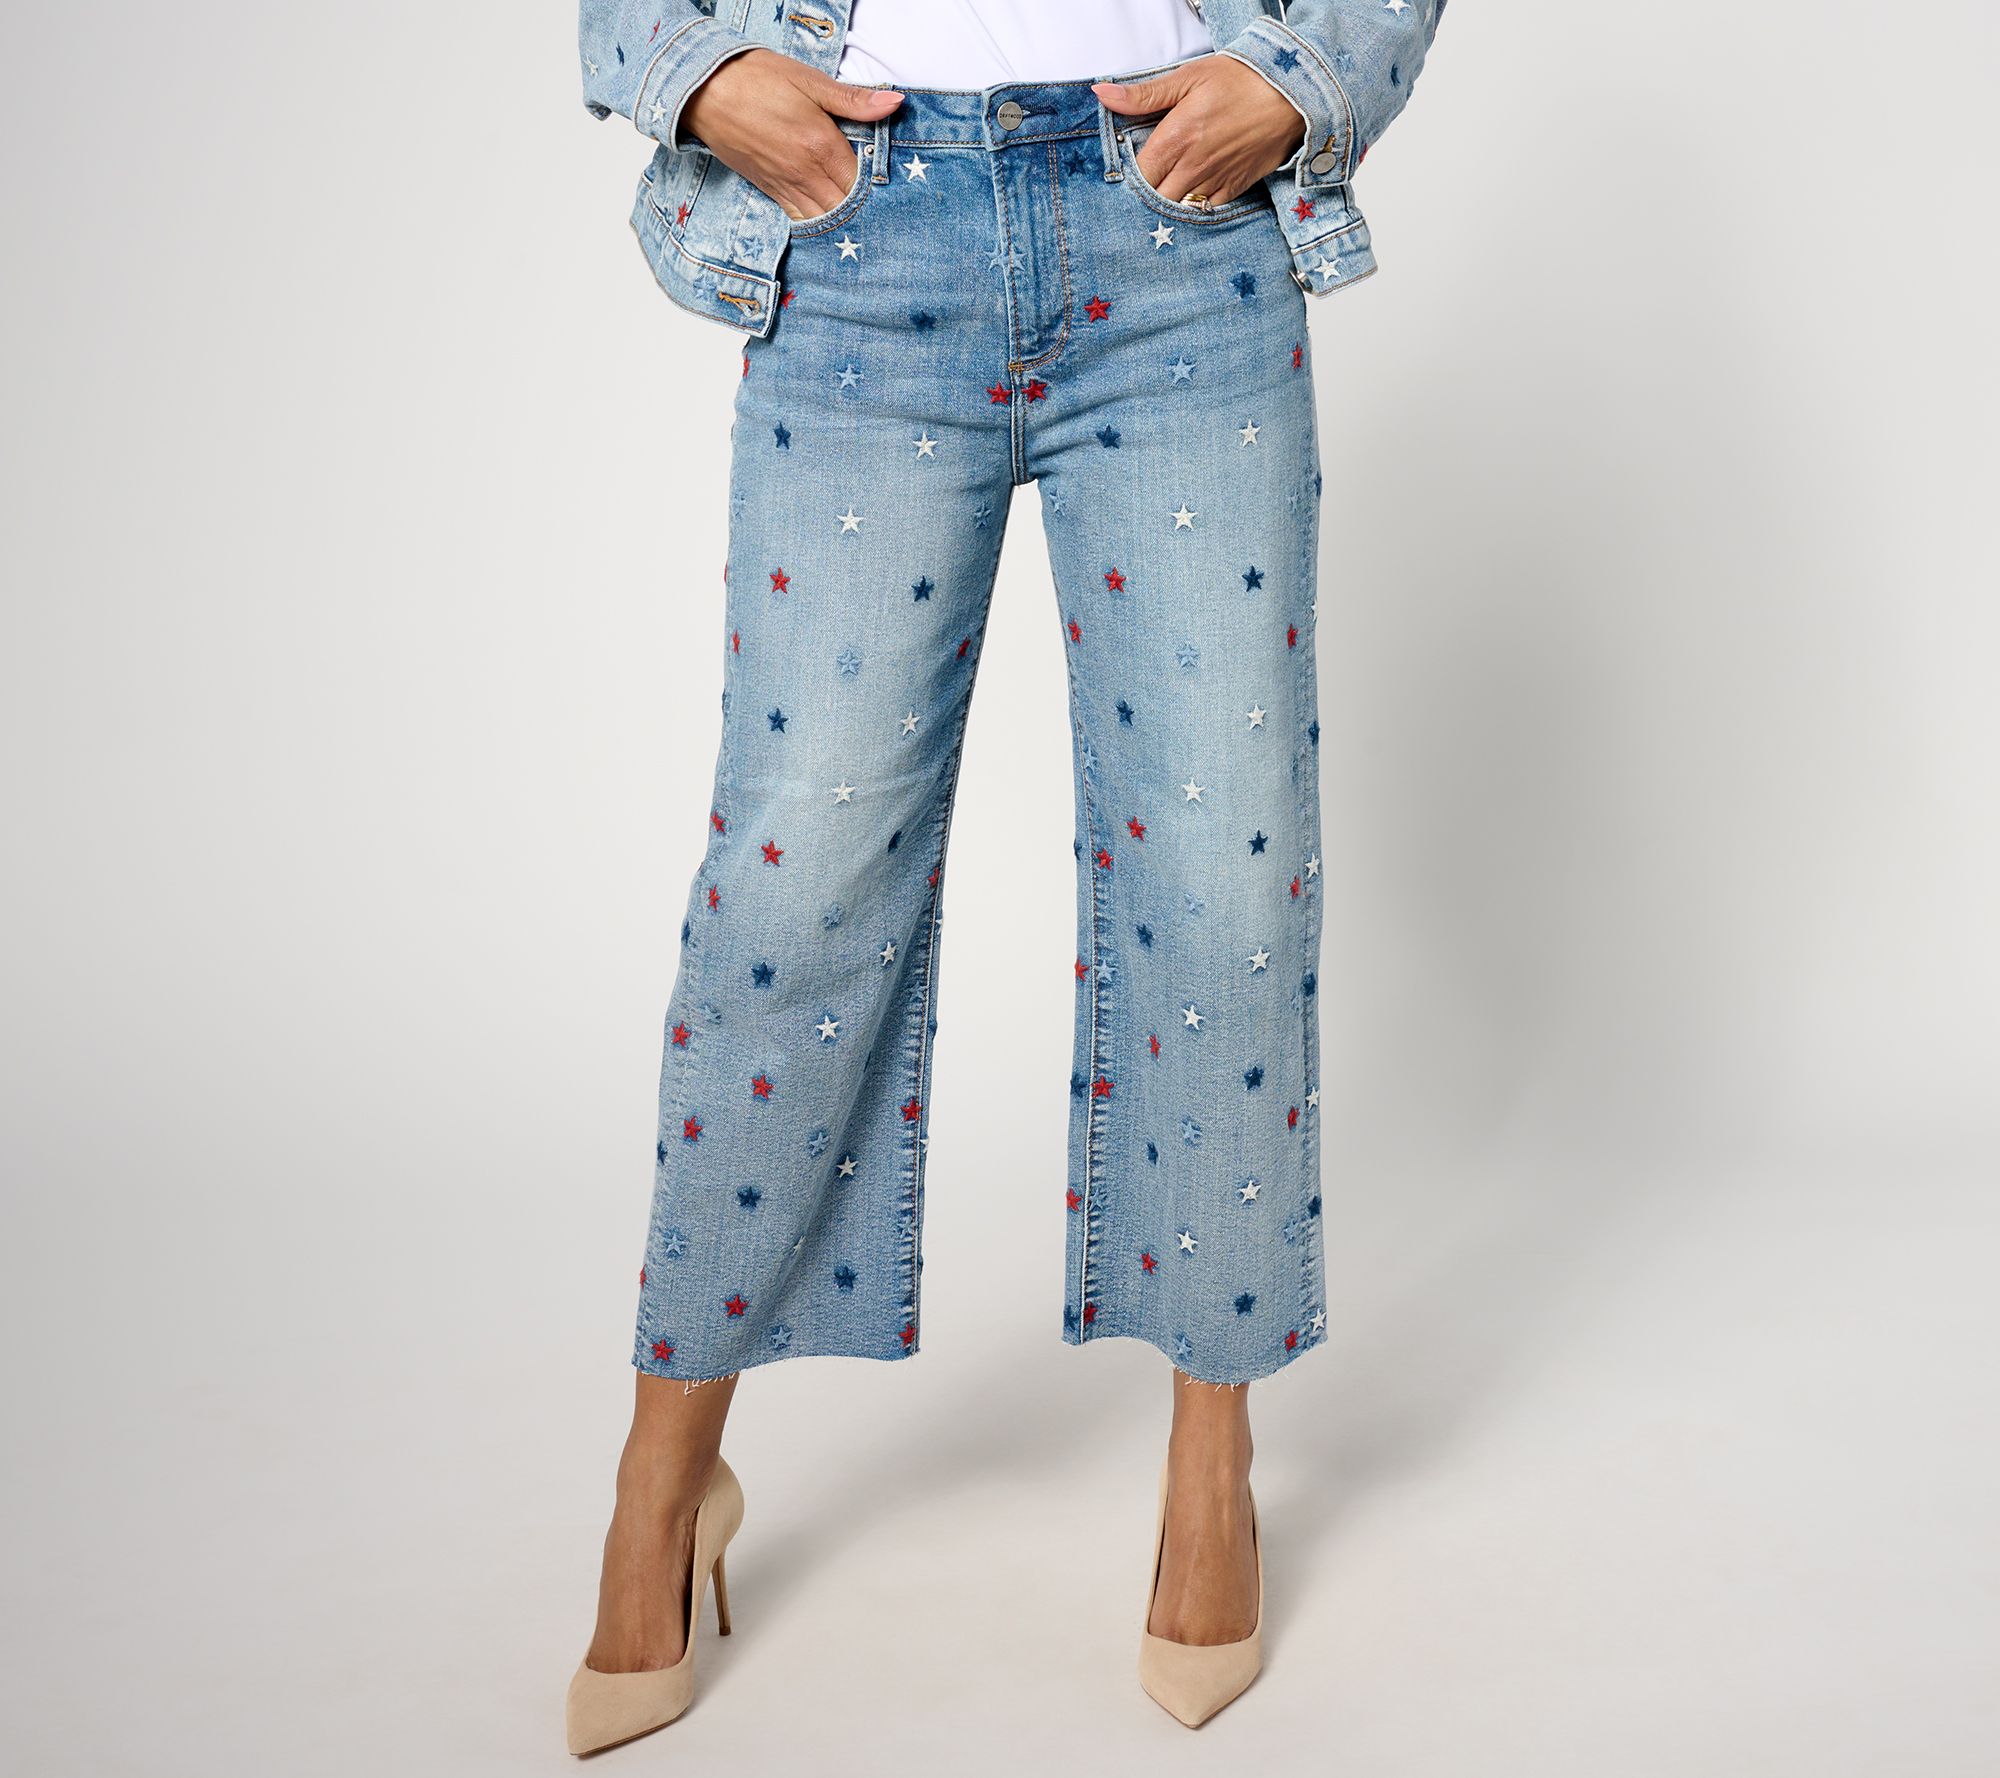 Driftwood Jeans Charlee Wide Leg Embroidered Crop - Starry Night